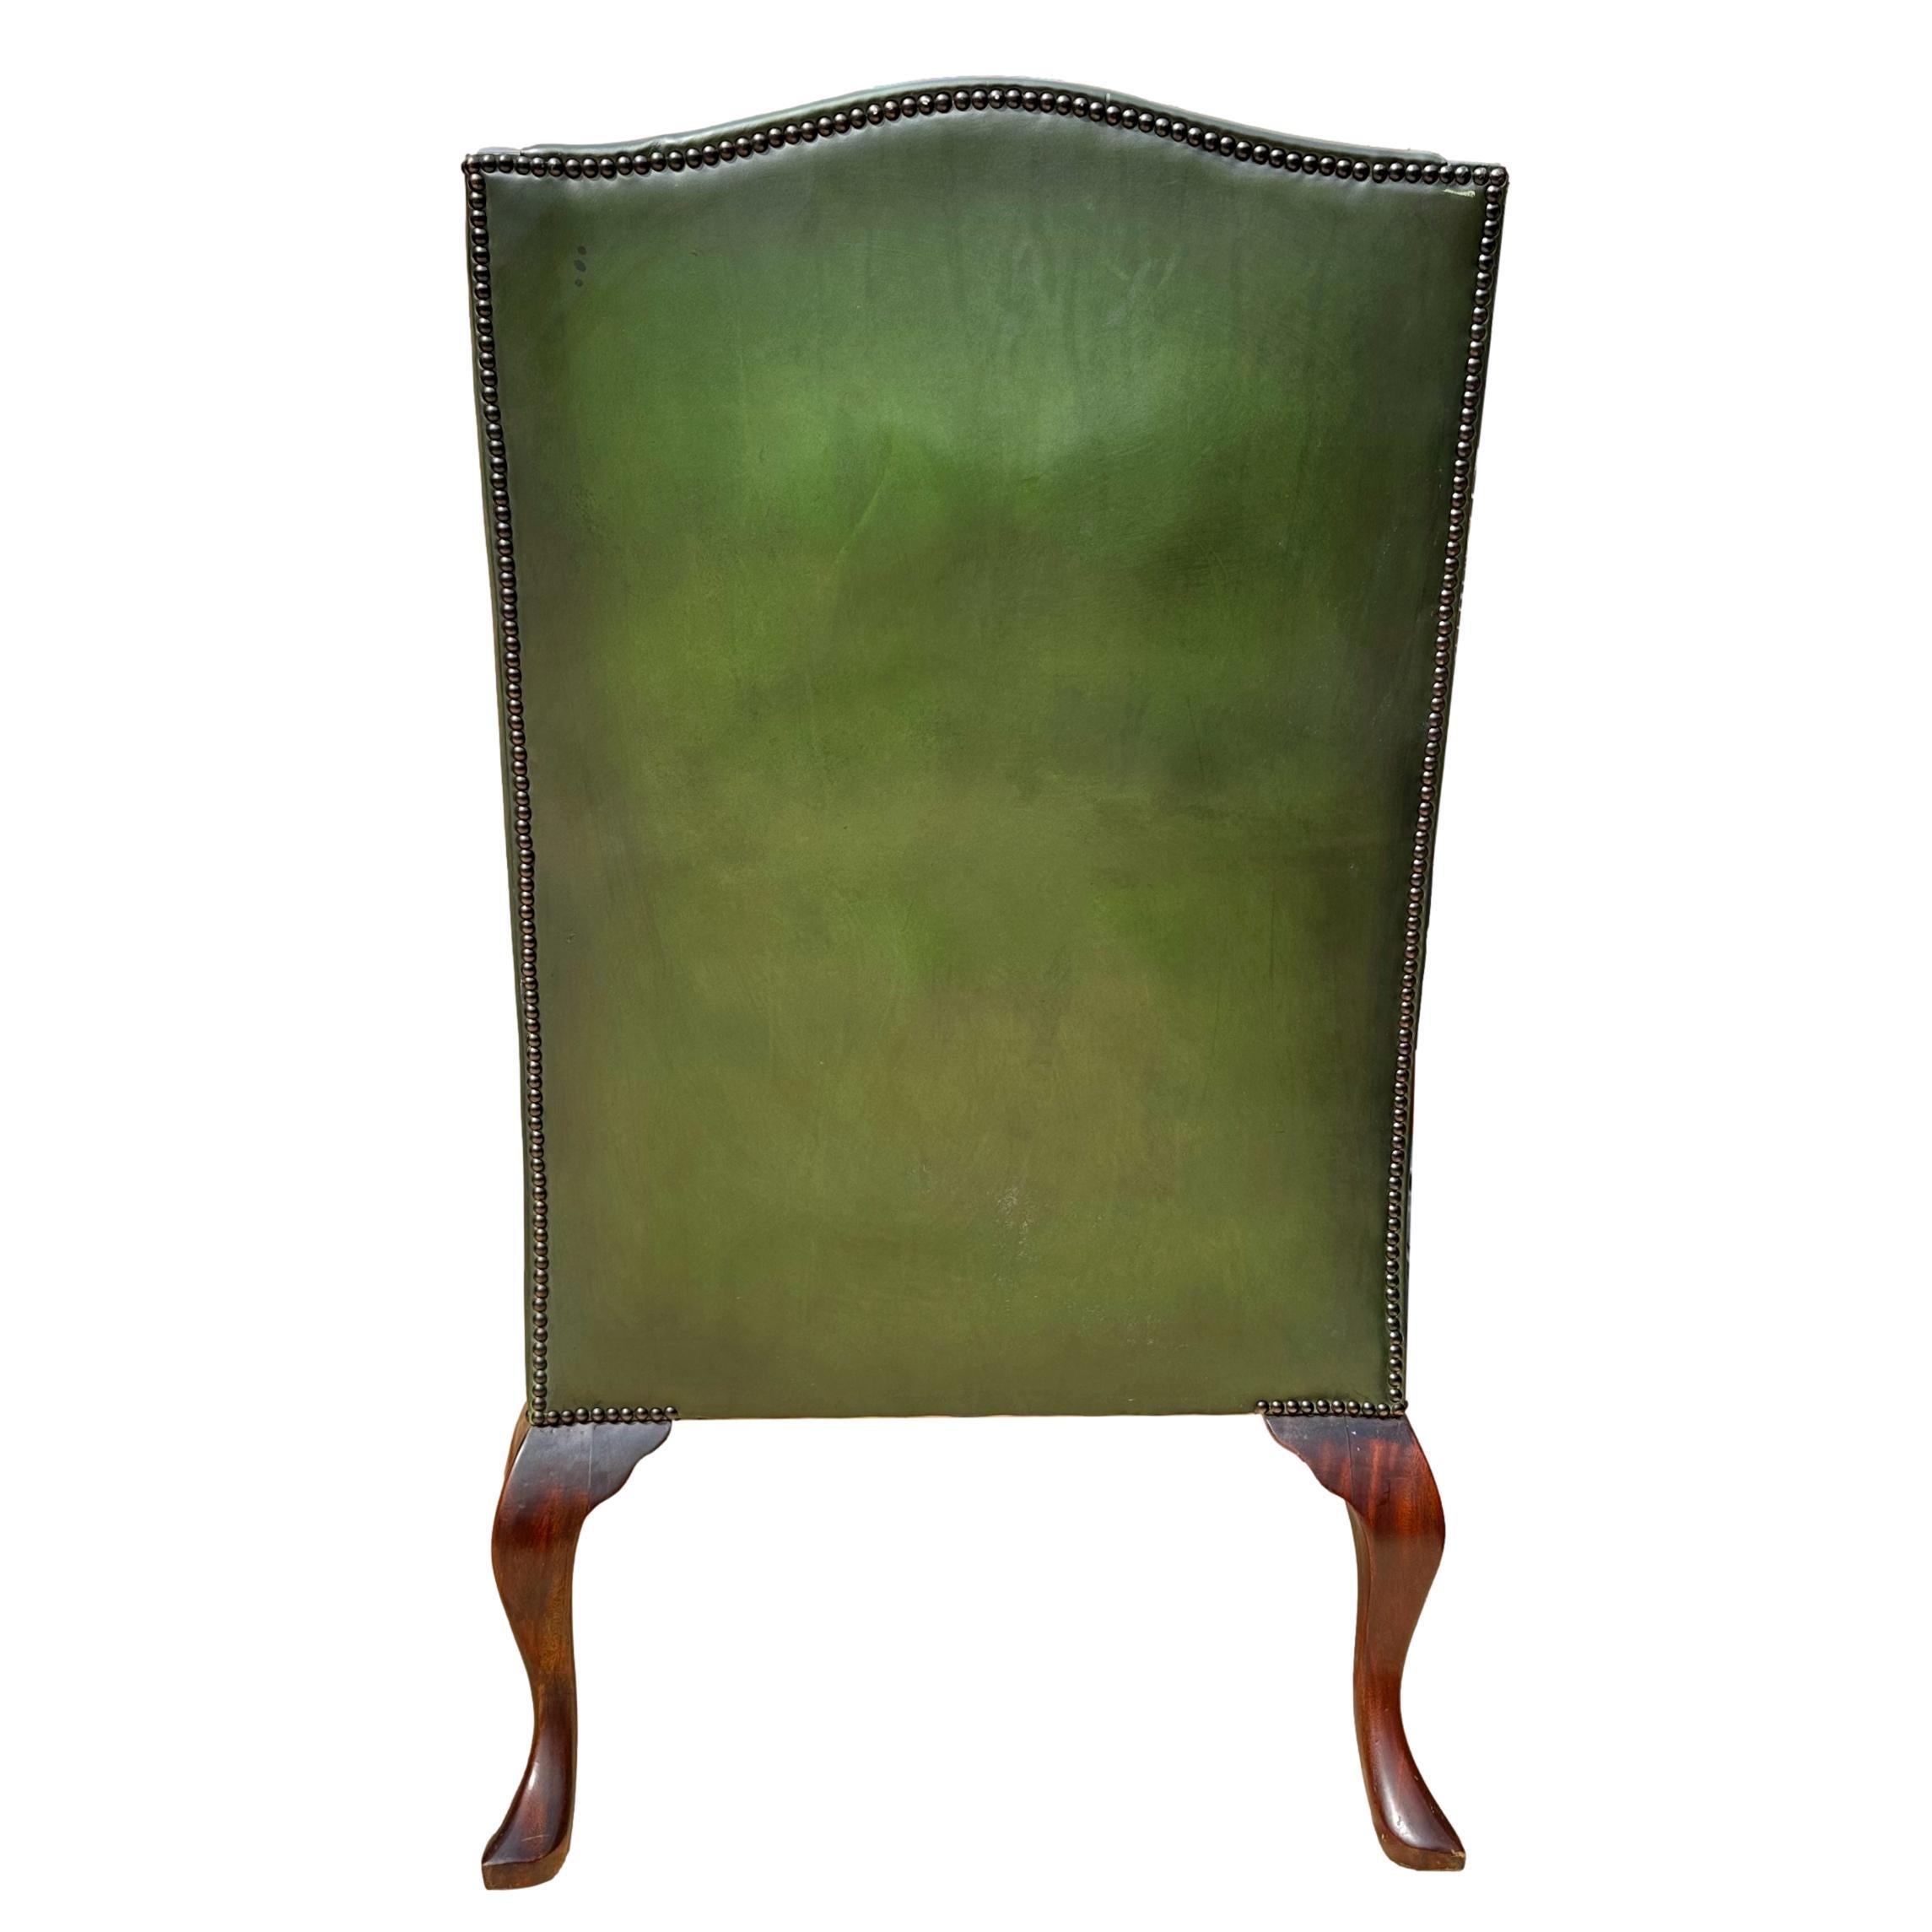 Pair of Edwardian Green Leather Wing Back Chairs, English, ca. 1920. For Sale 3